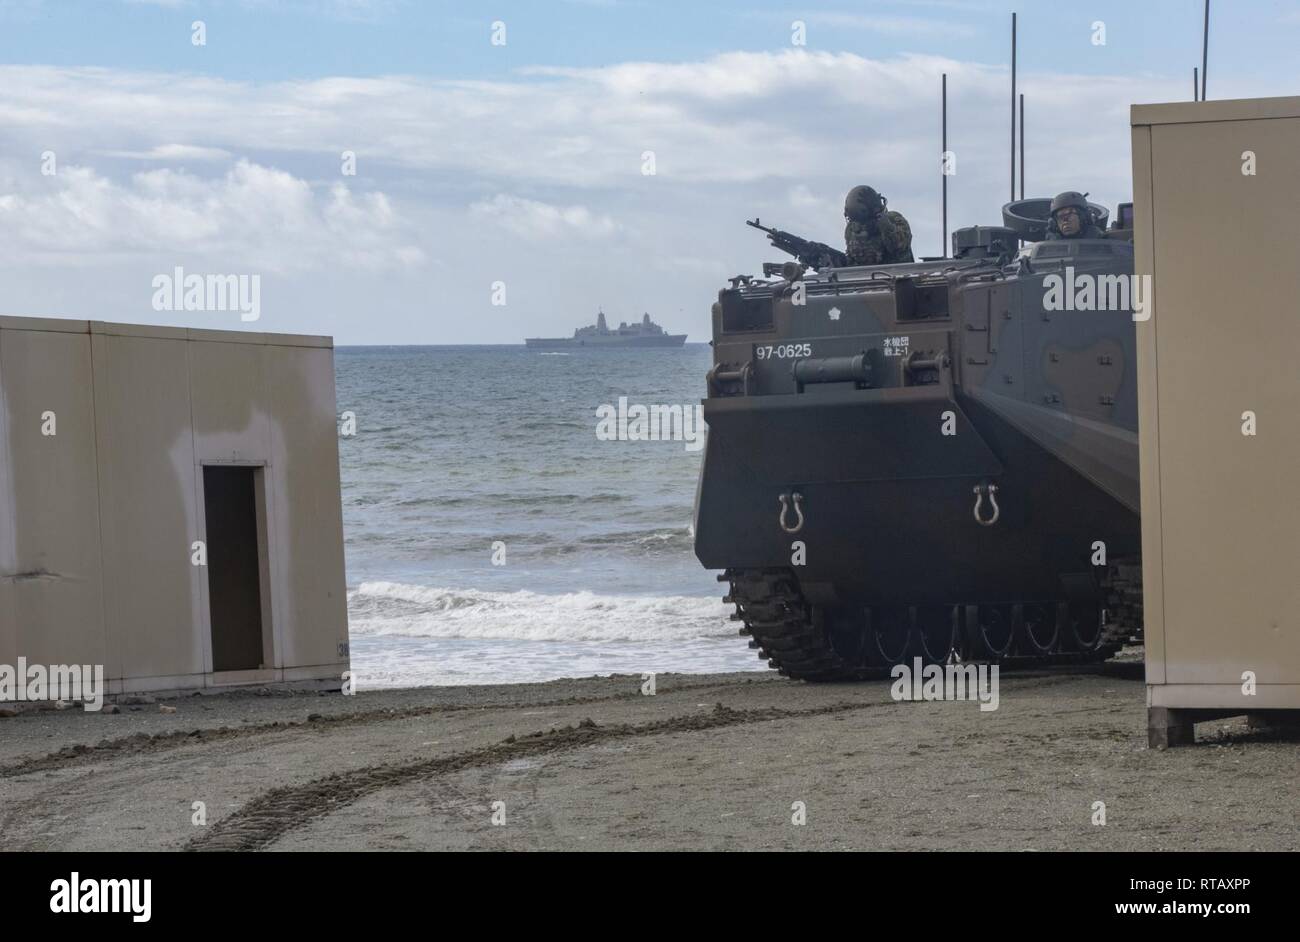 CAMP PENDLETON, Calif. (Feb. 4, 2019) Japan Ground Self-Defense Force (JGSDF) Soldiers with 1st Amphibious Rapid Deployment Regiment, move assault amphibious vehicles through urban operations during an amphibious landing exercise for Iron Fist 2019, at U.S. Marine Corps Base Camp Pendleton, Calif. Exercise Iron Fist is an annual, multilateral training exercise where U.S. and Japanese service members train together and share techniques, tactics and procedures to improve their combined operational capabilities. Stock Photo